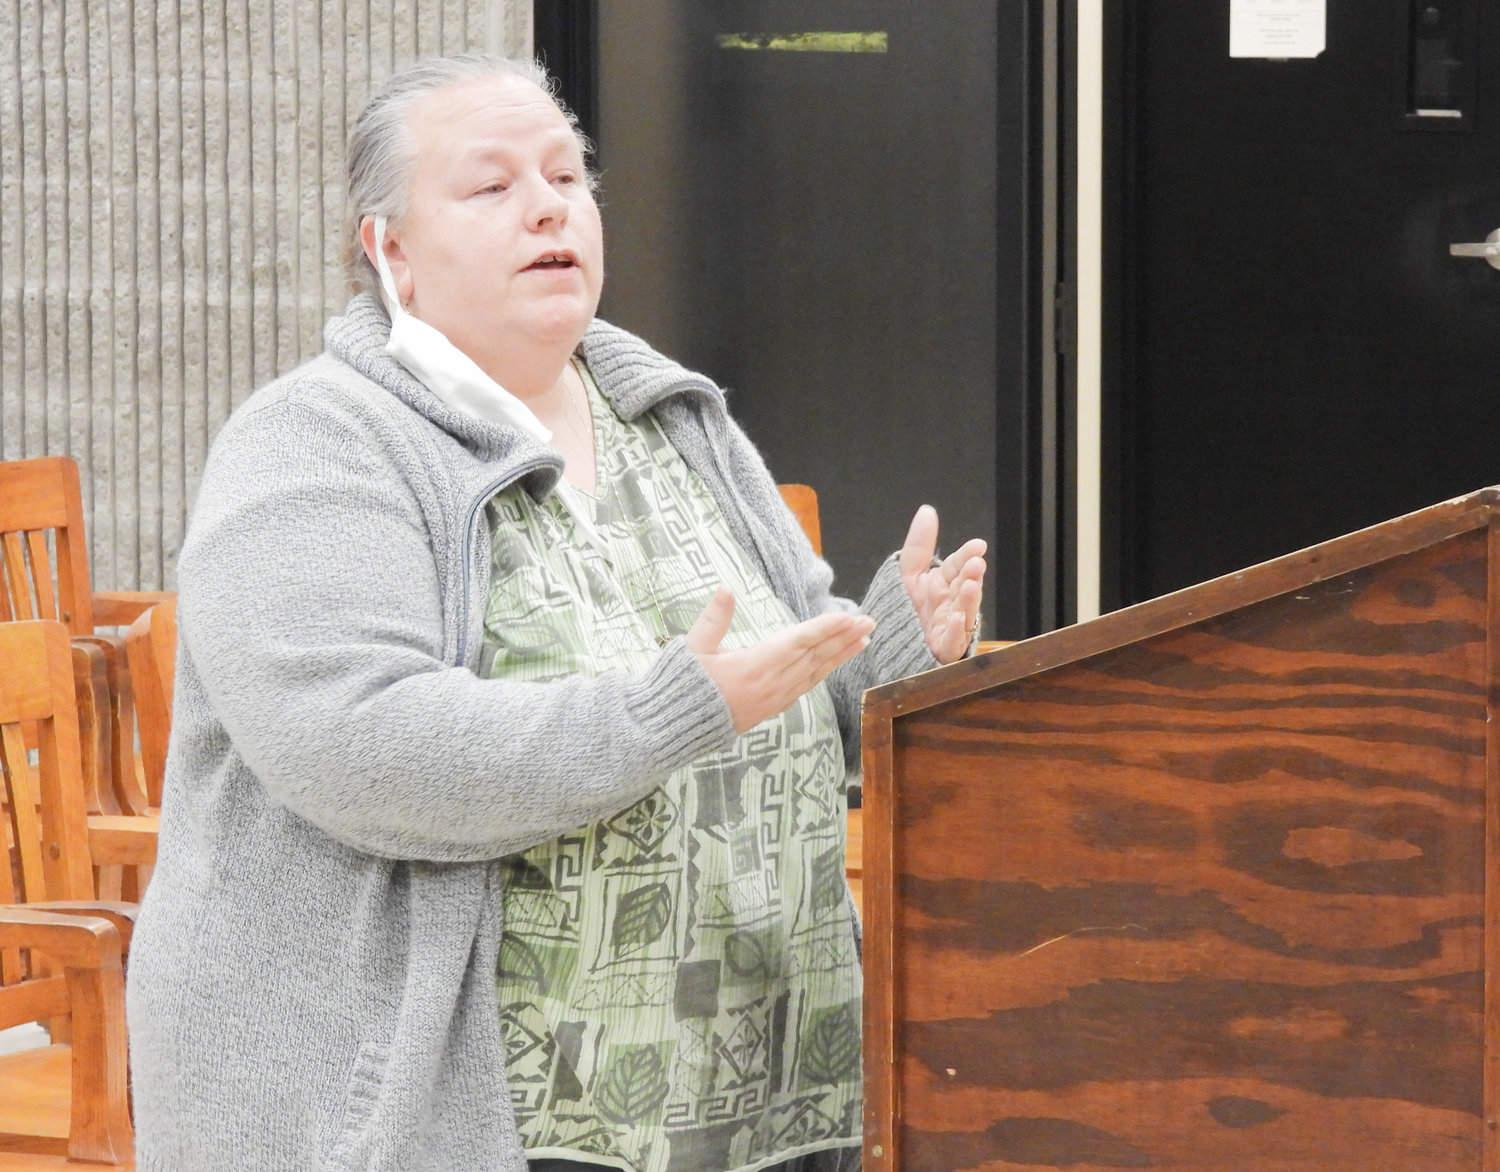 Karing Kitchen Program Coordinator Melissa King speaks at the Tuesday, Nov. 1, Common Council meeting in Oneida, urging councilors to consider the plight of the community’s homeless population.